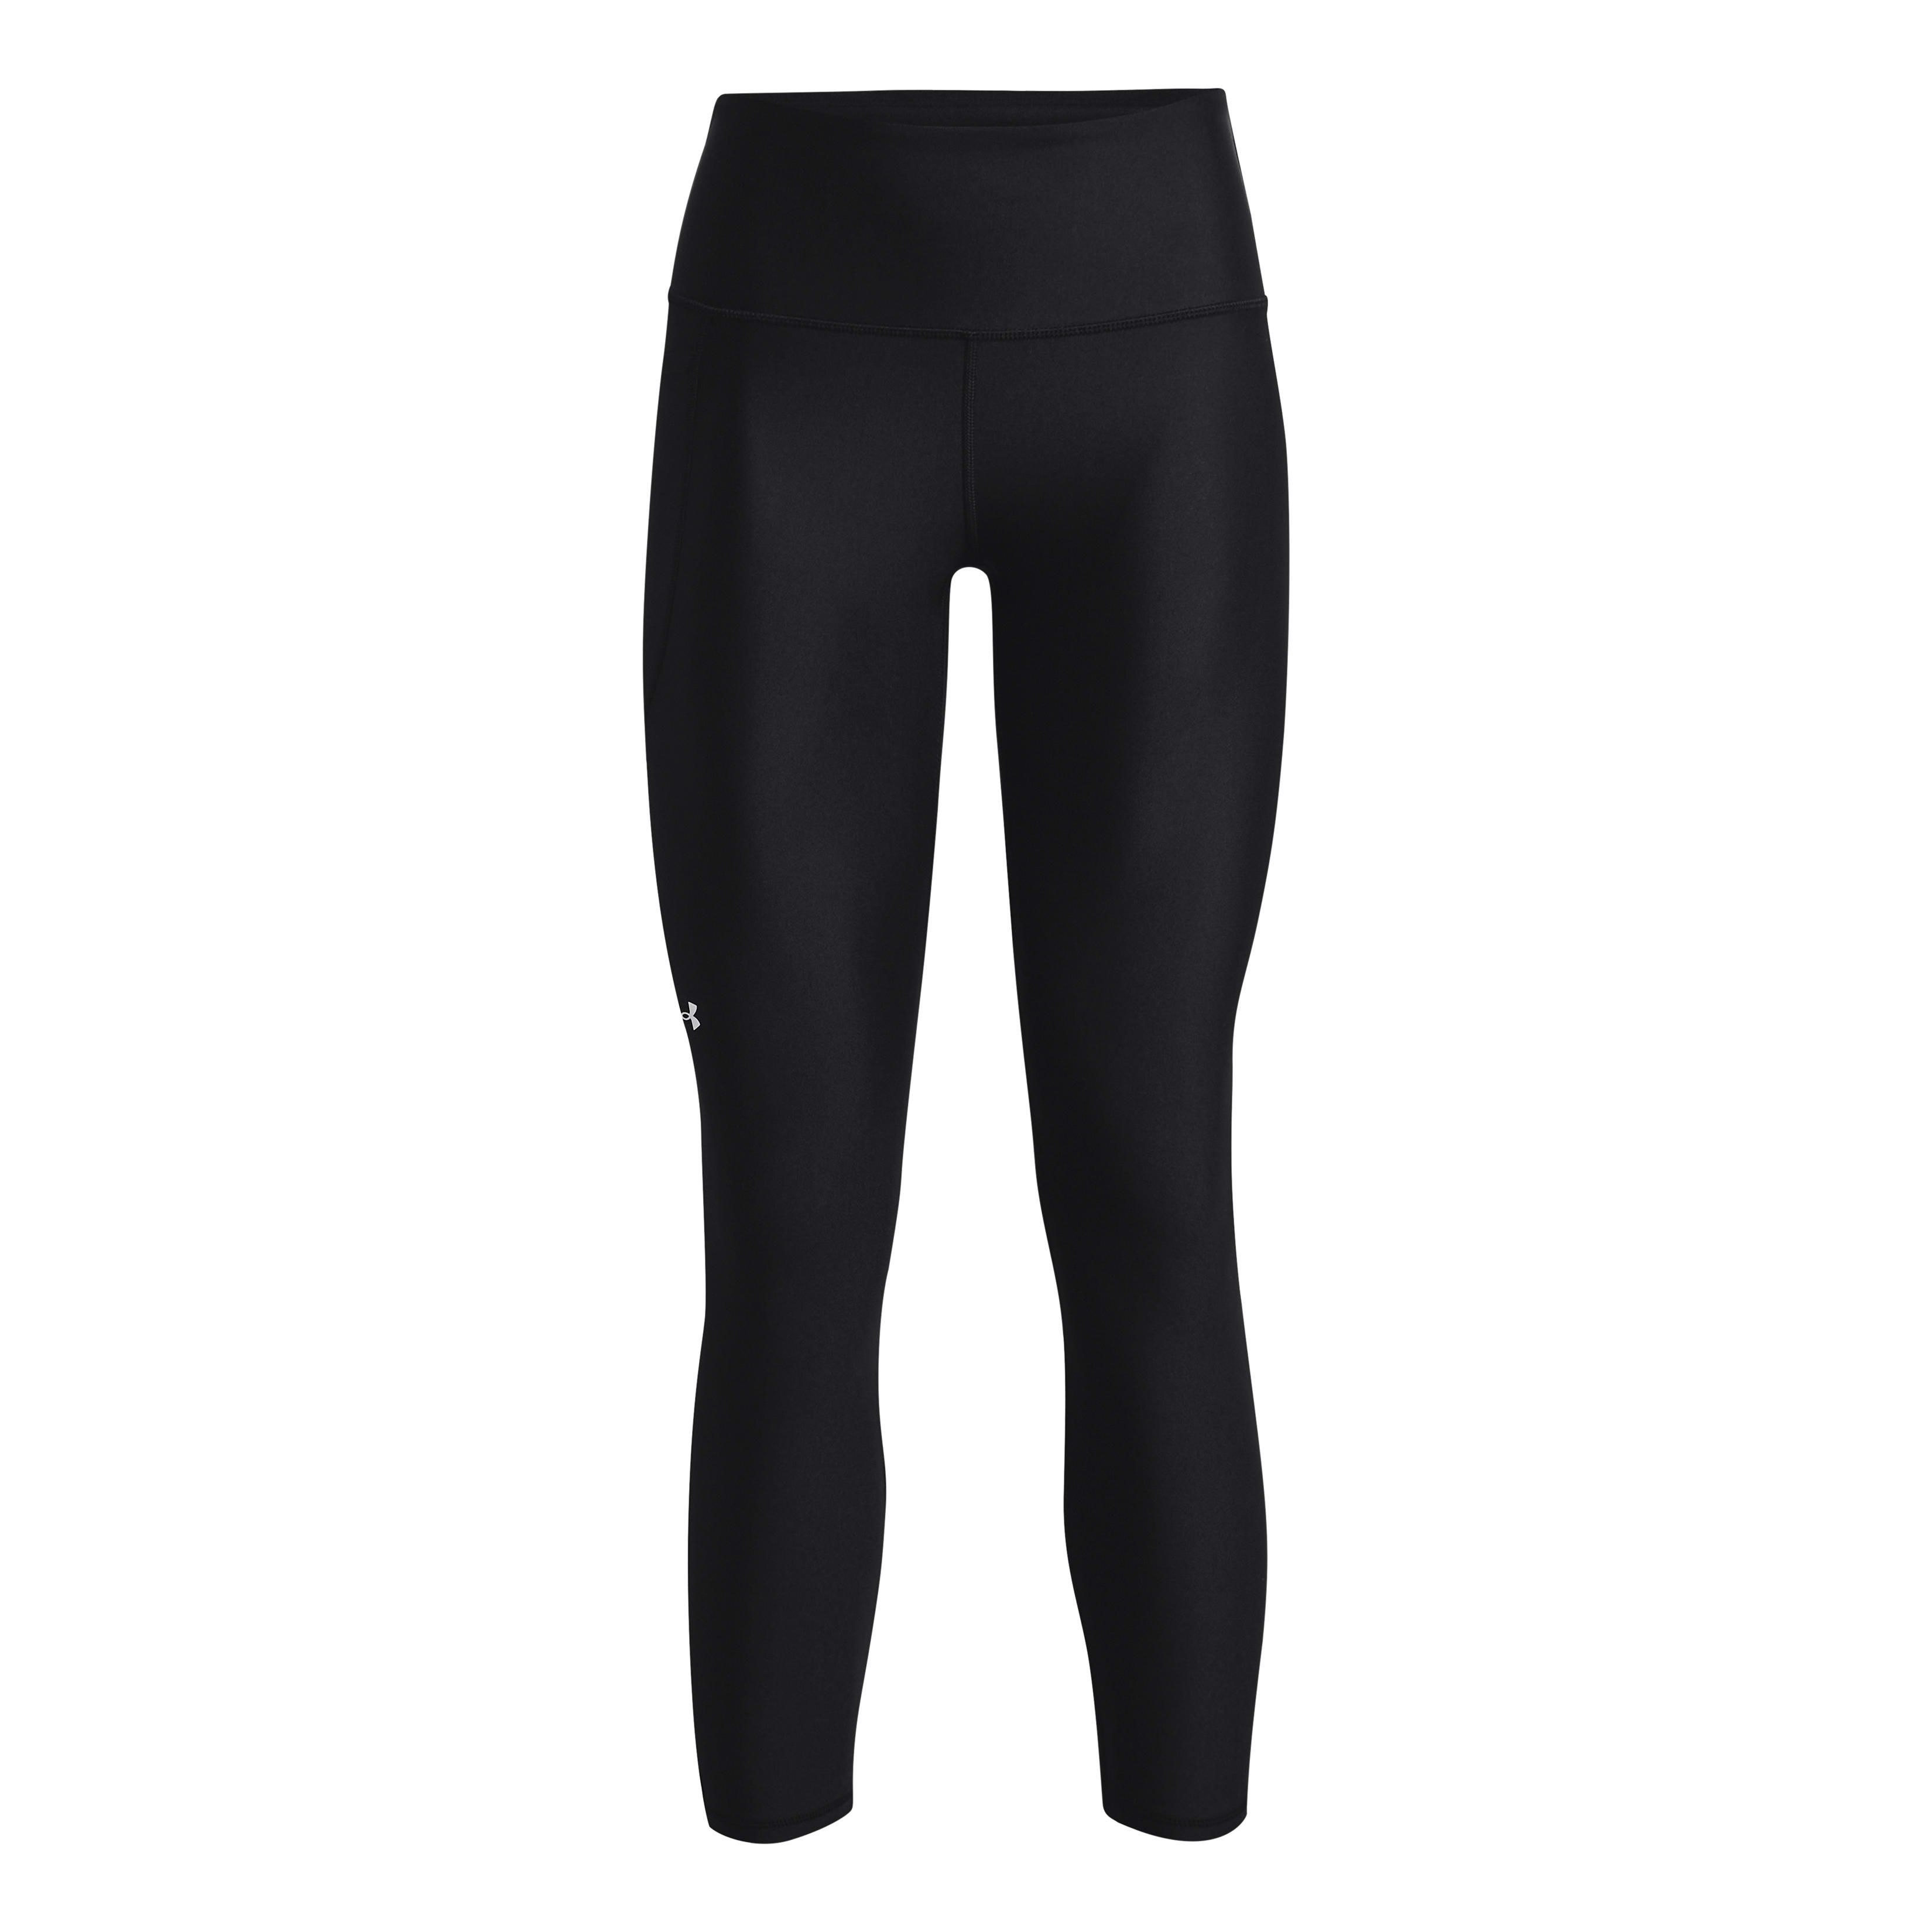 Natural Reflections® Women's Campside Skimmer Pants